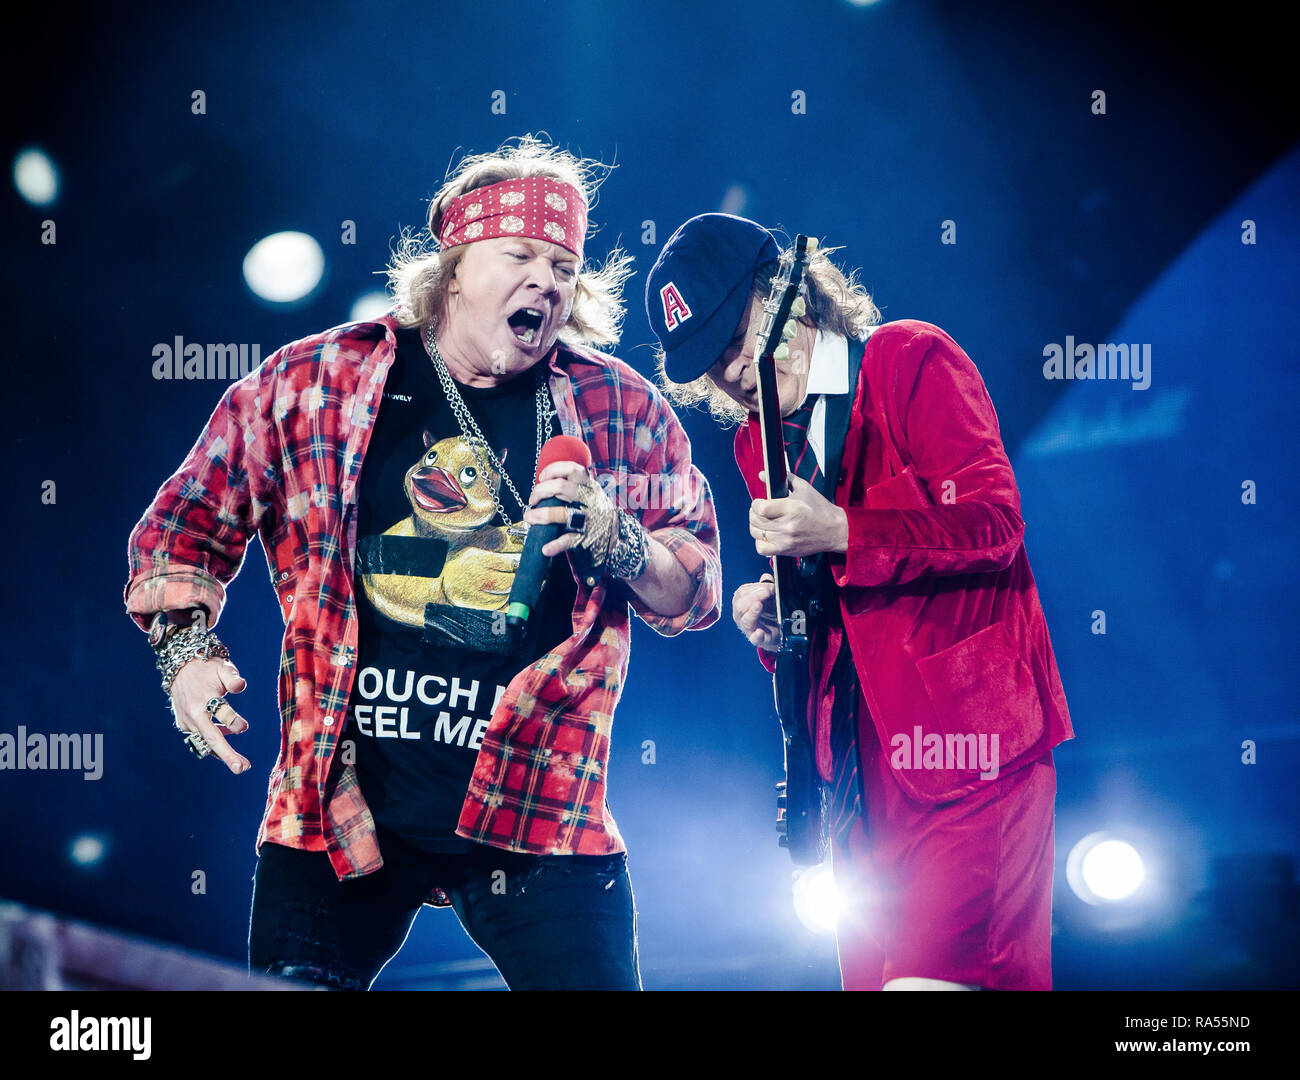 The Australian rock band AC/DC performs a live concert at Ceres Park in Aarhus as part of the Rock or Bust World 2016 Tour. Here musician and guitarist Angus Young (R) is seen live on stage with vocalist Axl Rose (L). Denmark, 12/06 2016. EXCLUDING DENMARK Stock Photo